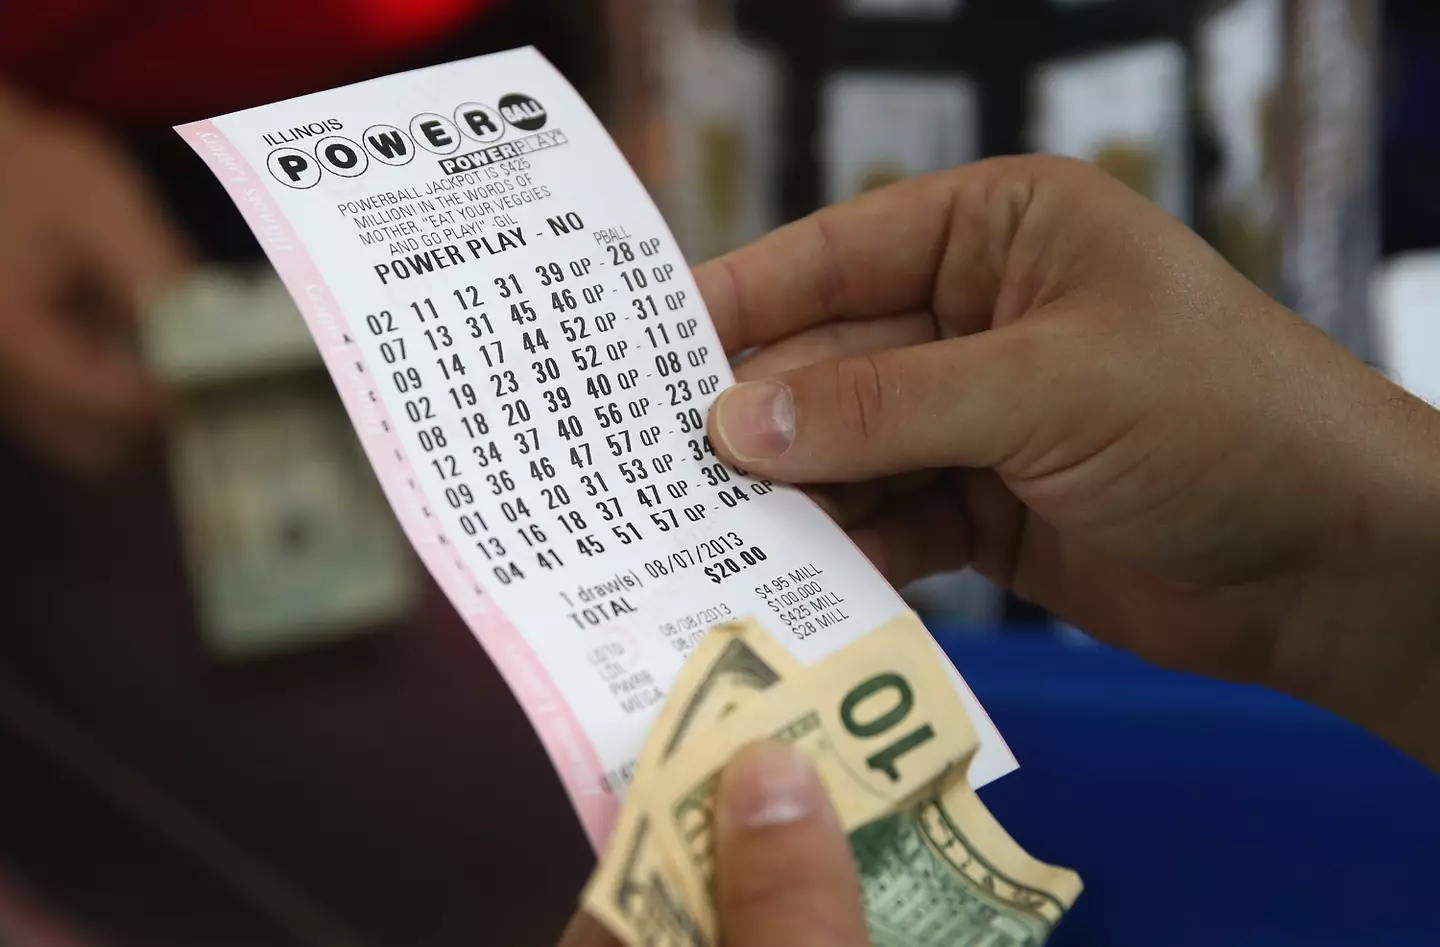 On Thursday, numbers will be drawn for the 150 million Australian dollar Powerball jackpot.